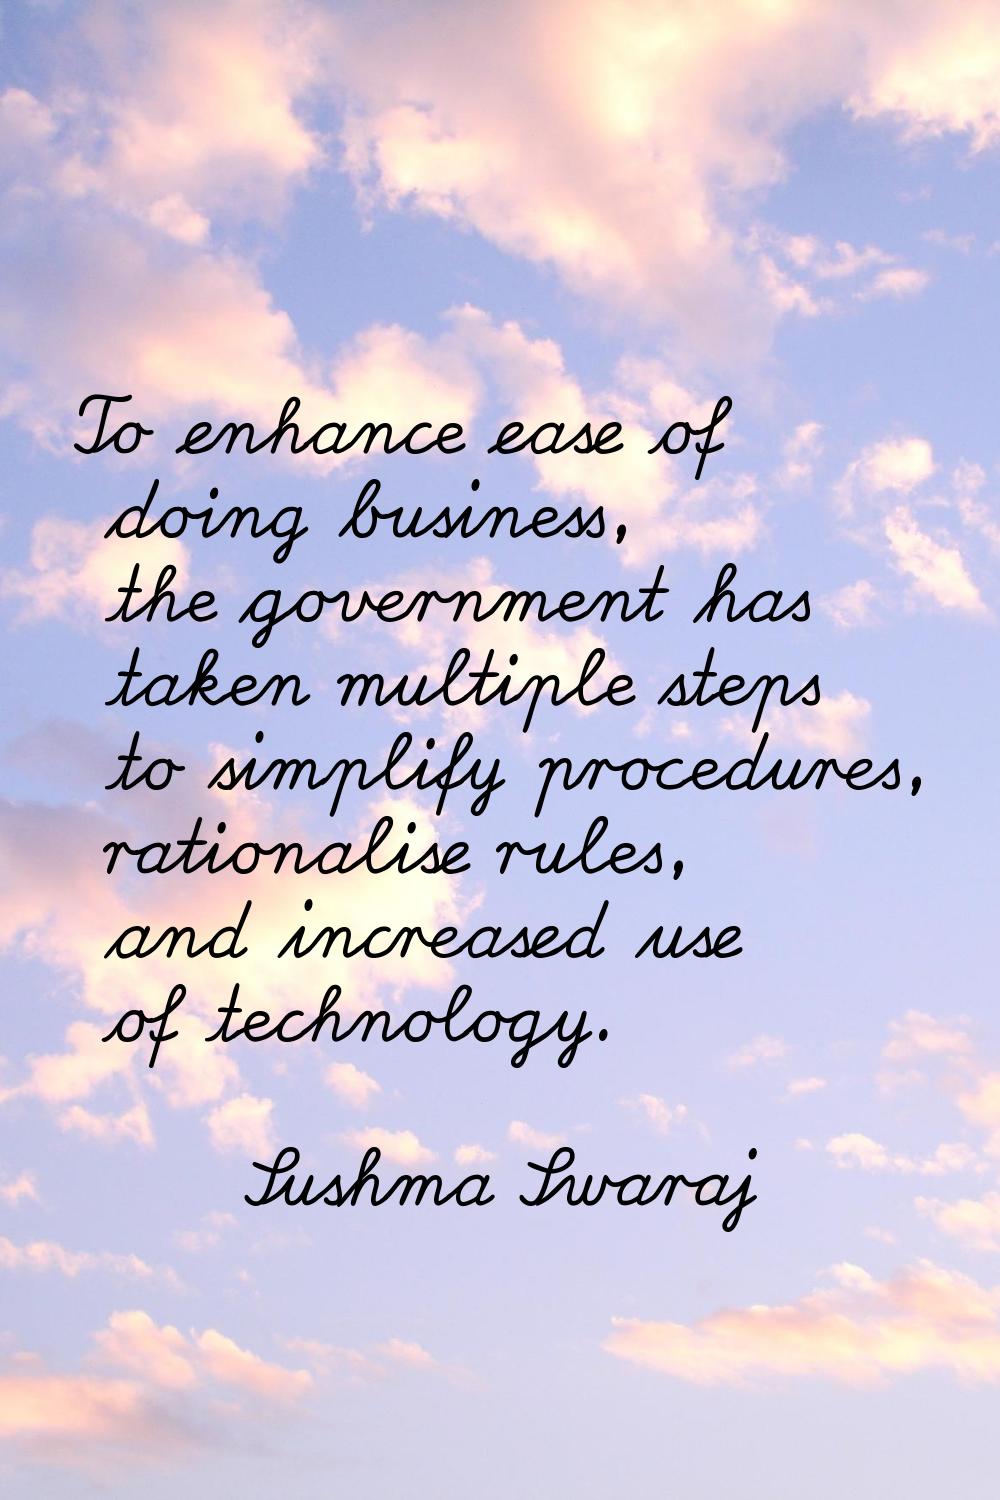 To enhance ease of doing business, the government has taken multiple steps to simplify procedures, 